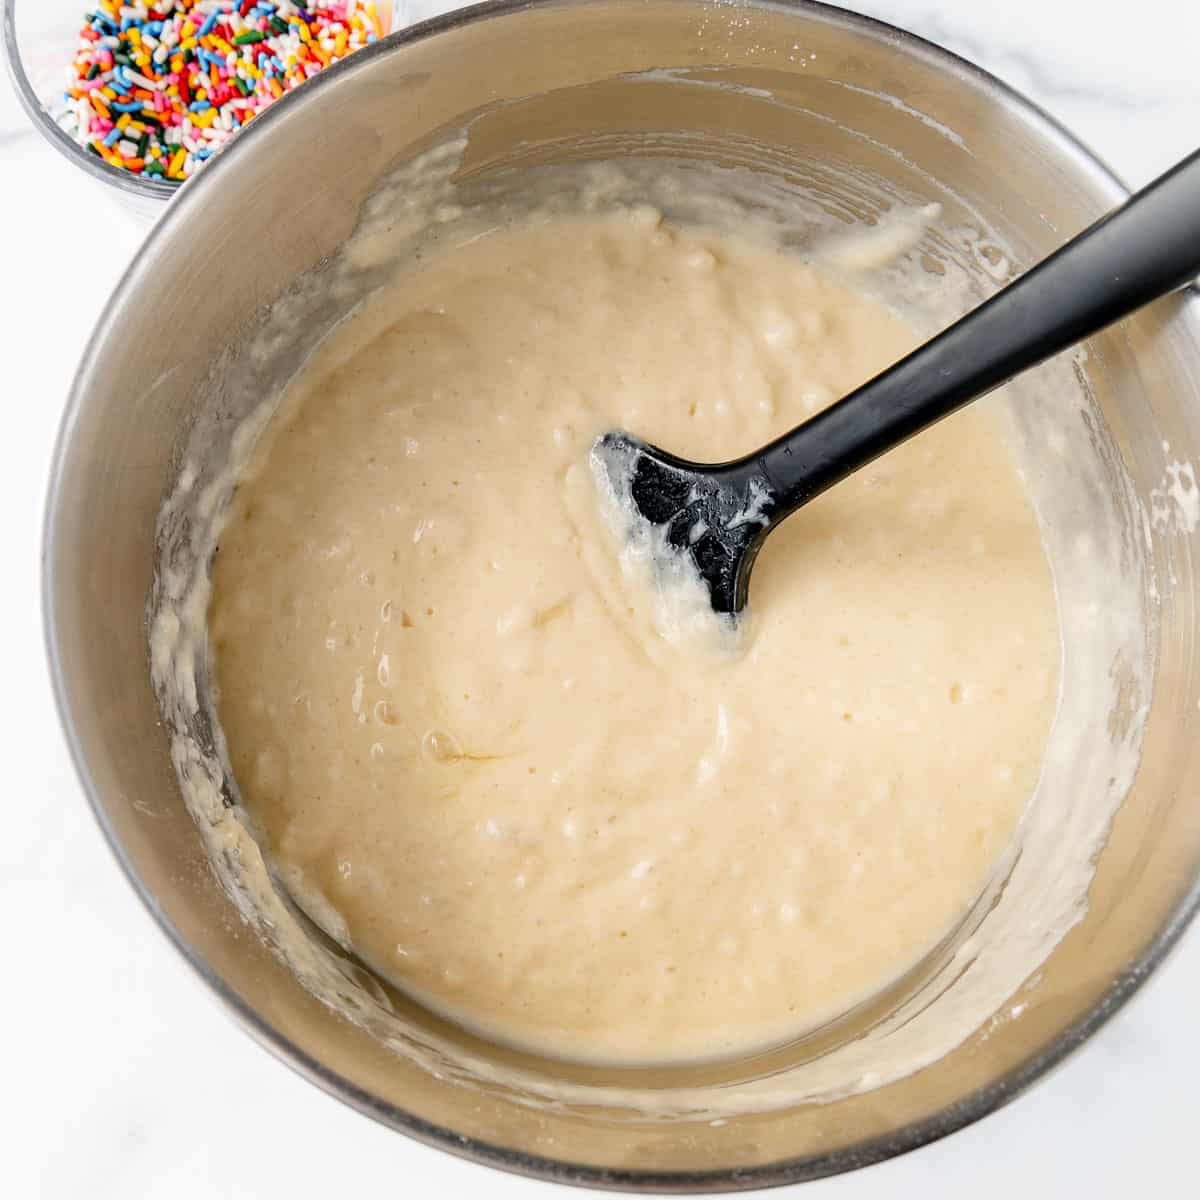 The mixed batter in a silver bowl with a black spatula.